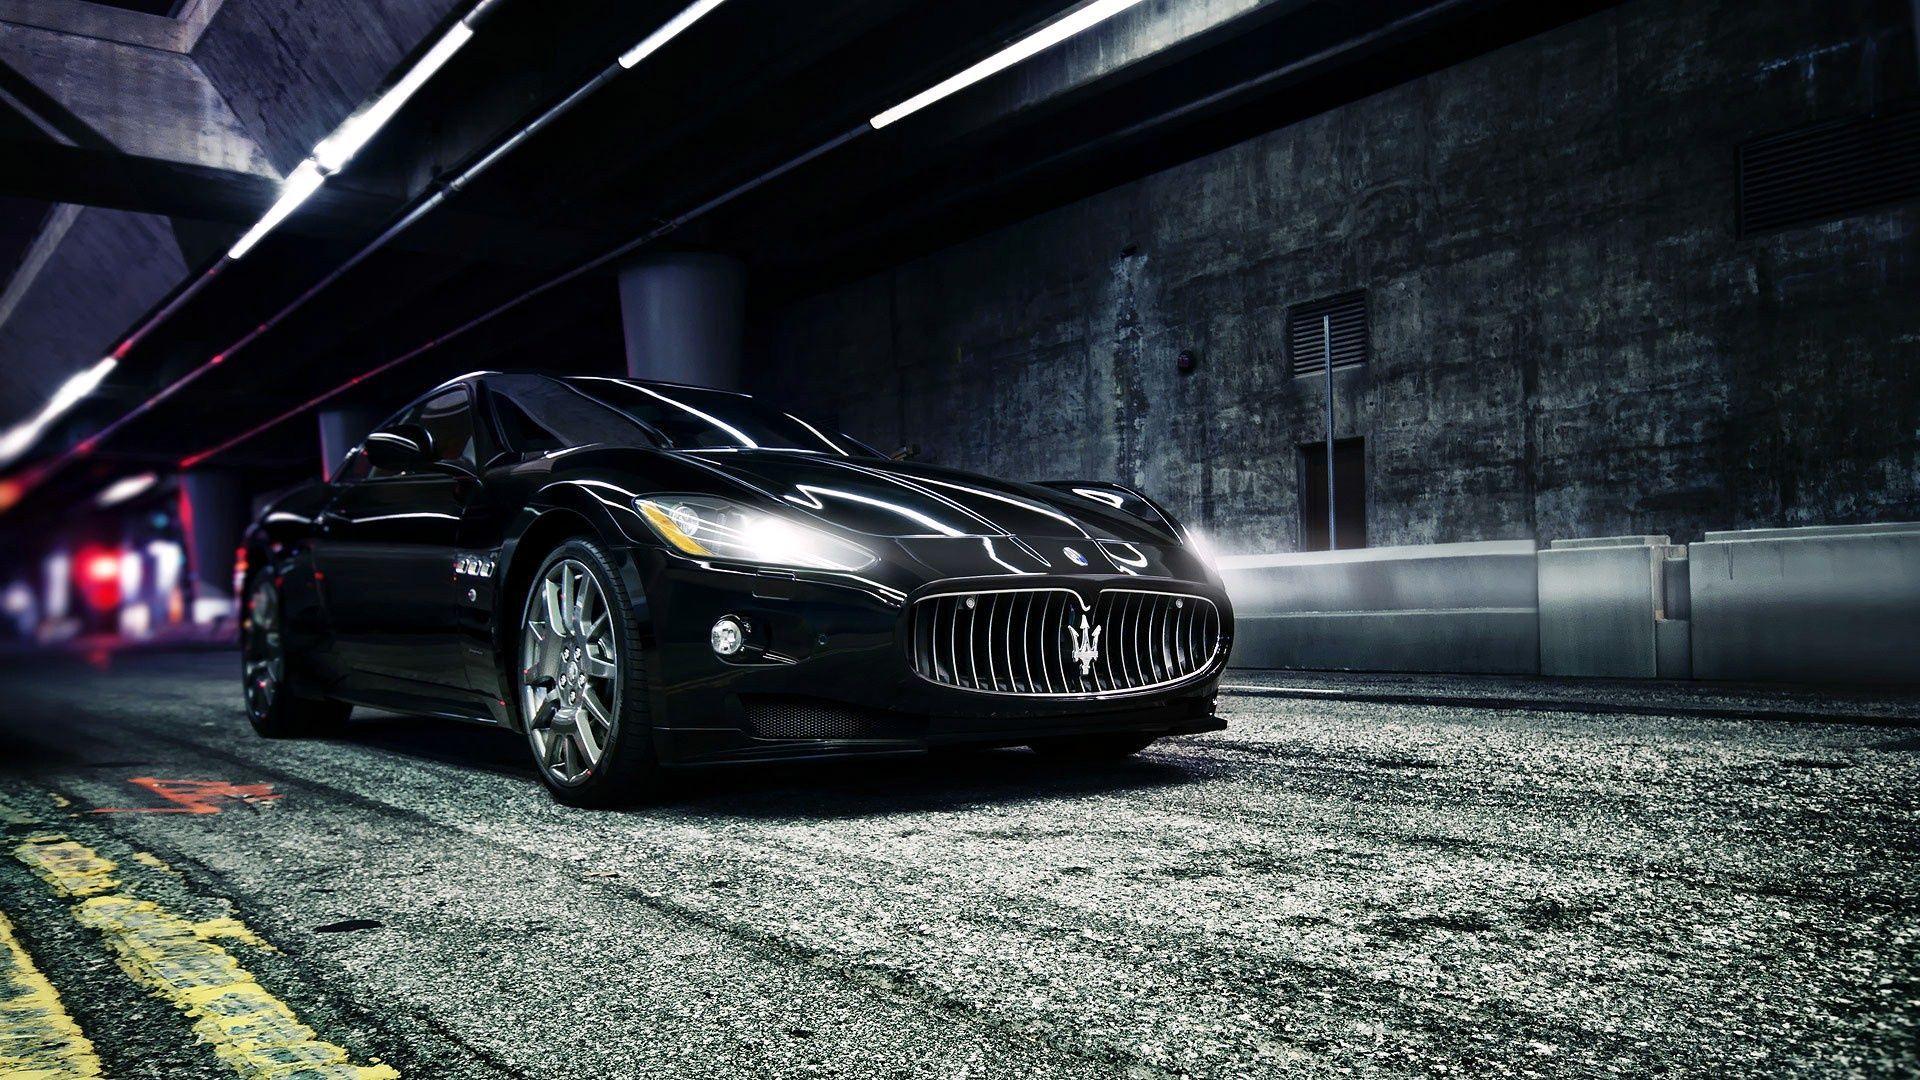 Maserati GranTurismo in black on hd wallpapers from